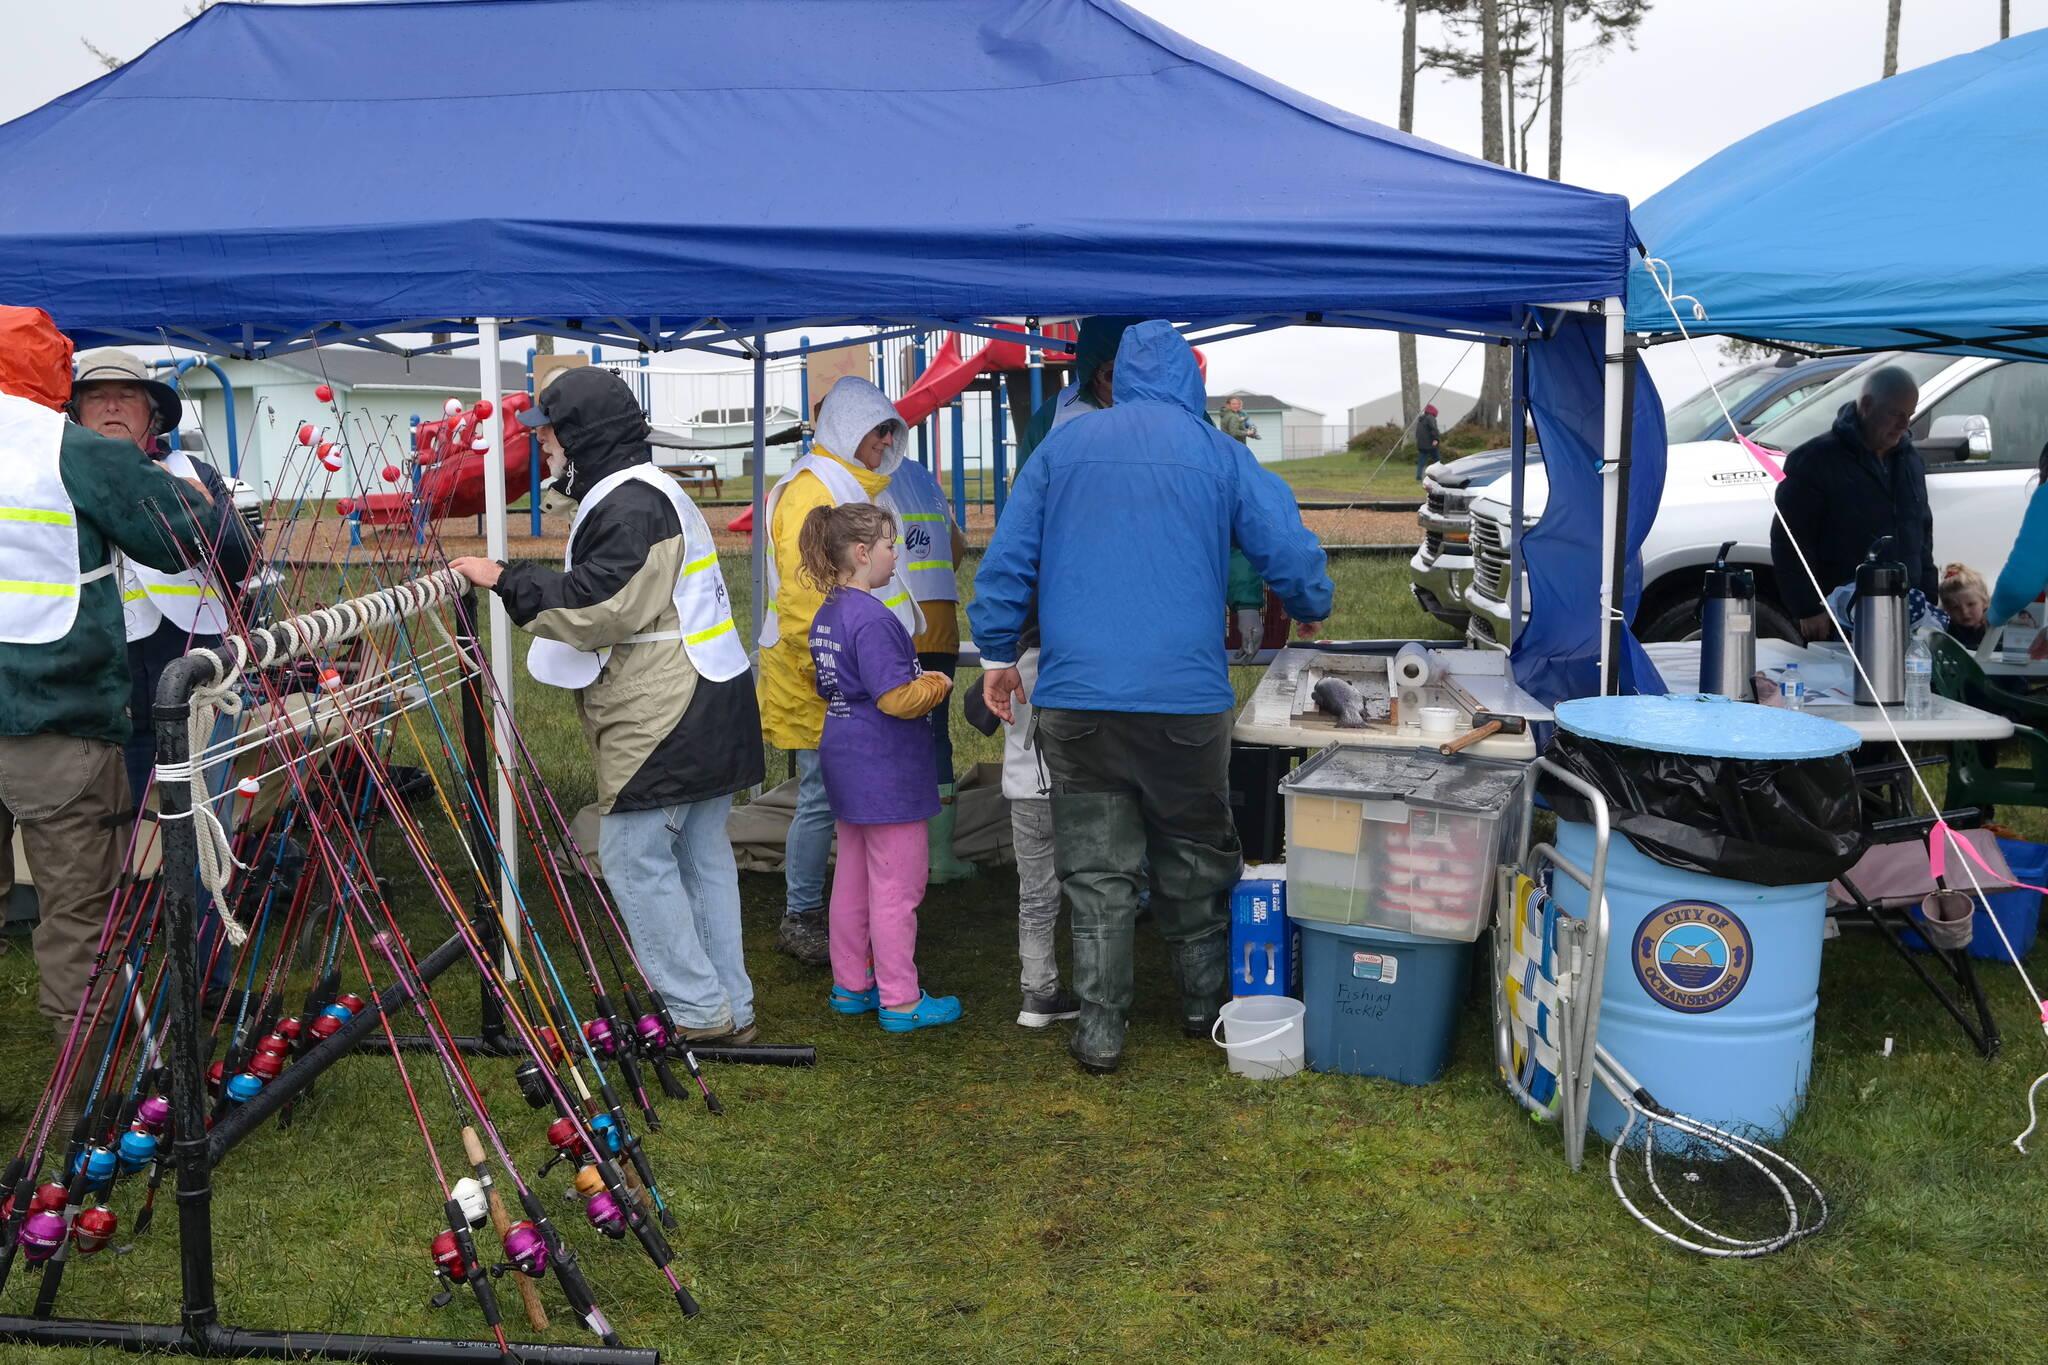 The Mark Swanson 12th Annual Ocean Shores Elks Youth Fishing Derby brought children and their families to Duck Lake on Saturday, May 7 despite poor weather conditions. Registration was free and participants were able to fish from a well-stocked lake while enjoying food, merchandise, and fish cleaning services. Erika Gebhardt I The Daily World